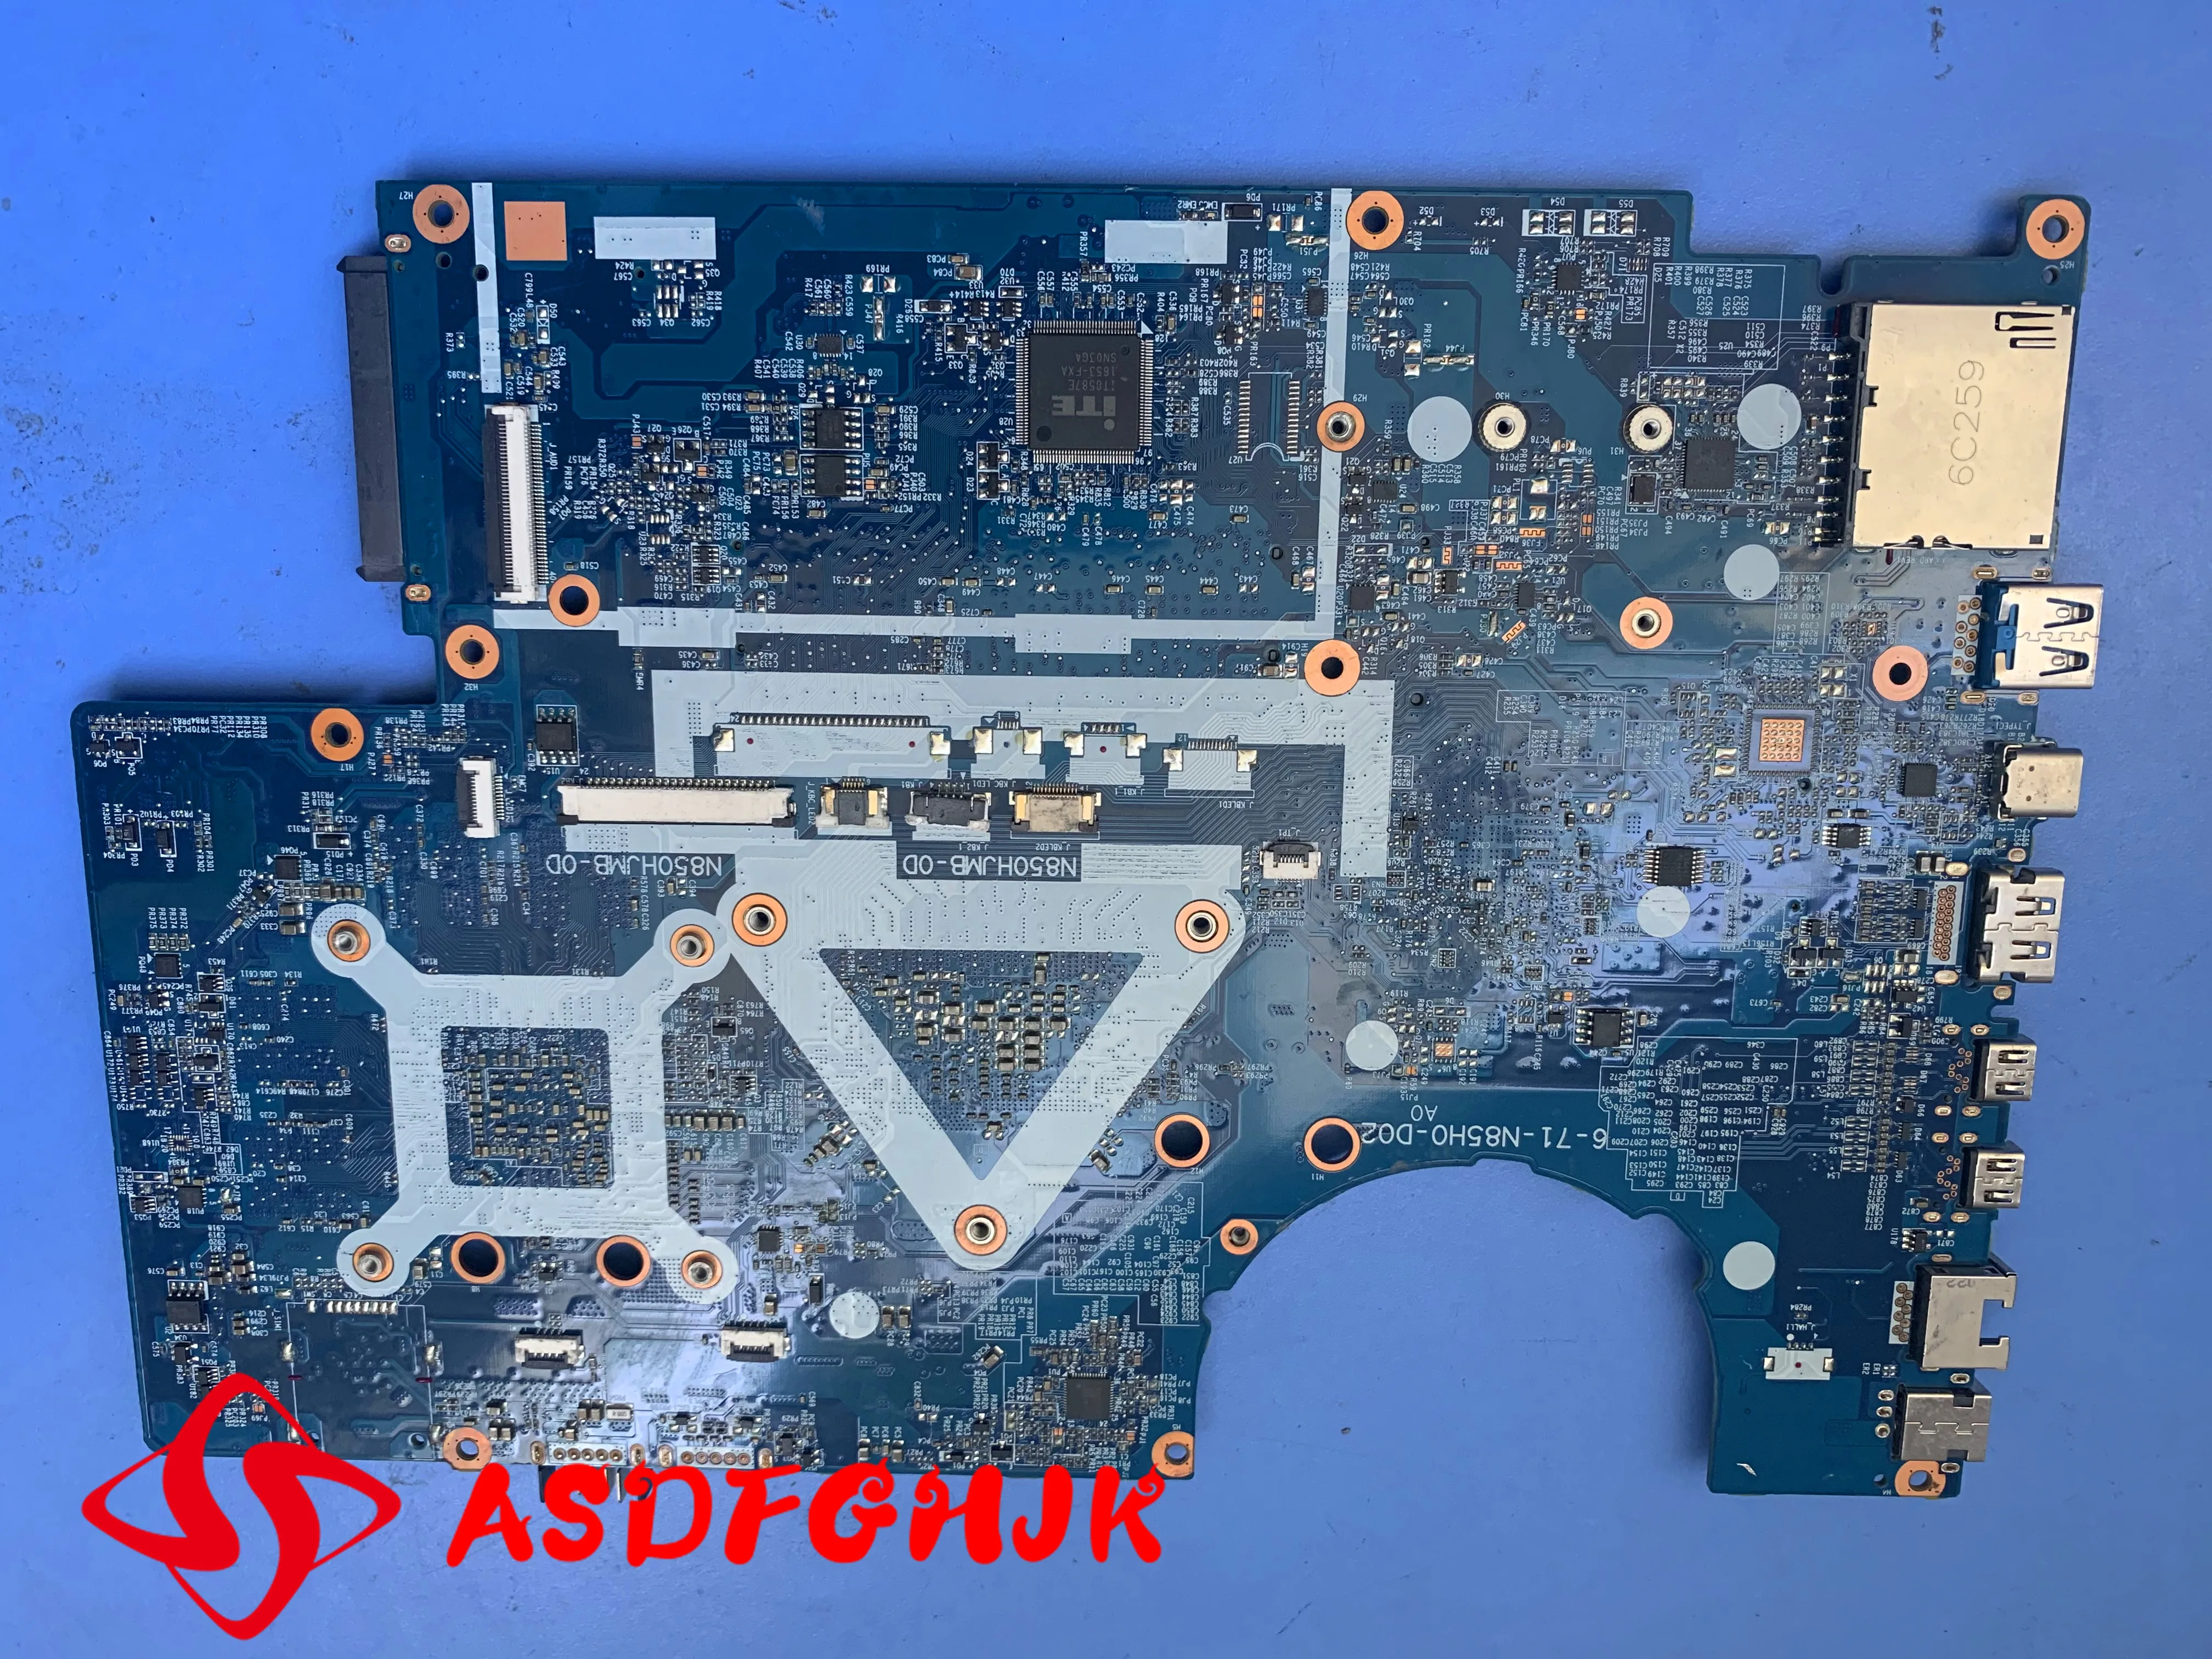 

High quality 6-71-N85H0-D02 for HASEE Z7M N850 N850H0 Laptop motherboard WITH SR32Q CPU GTX1050 100% working well